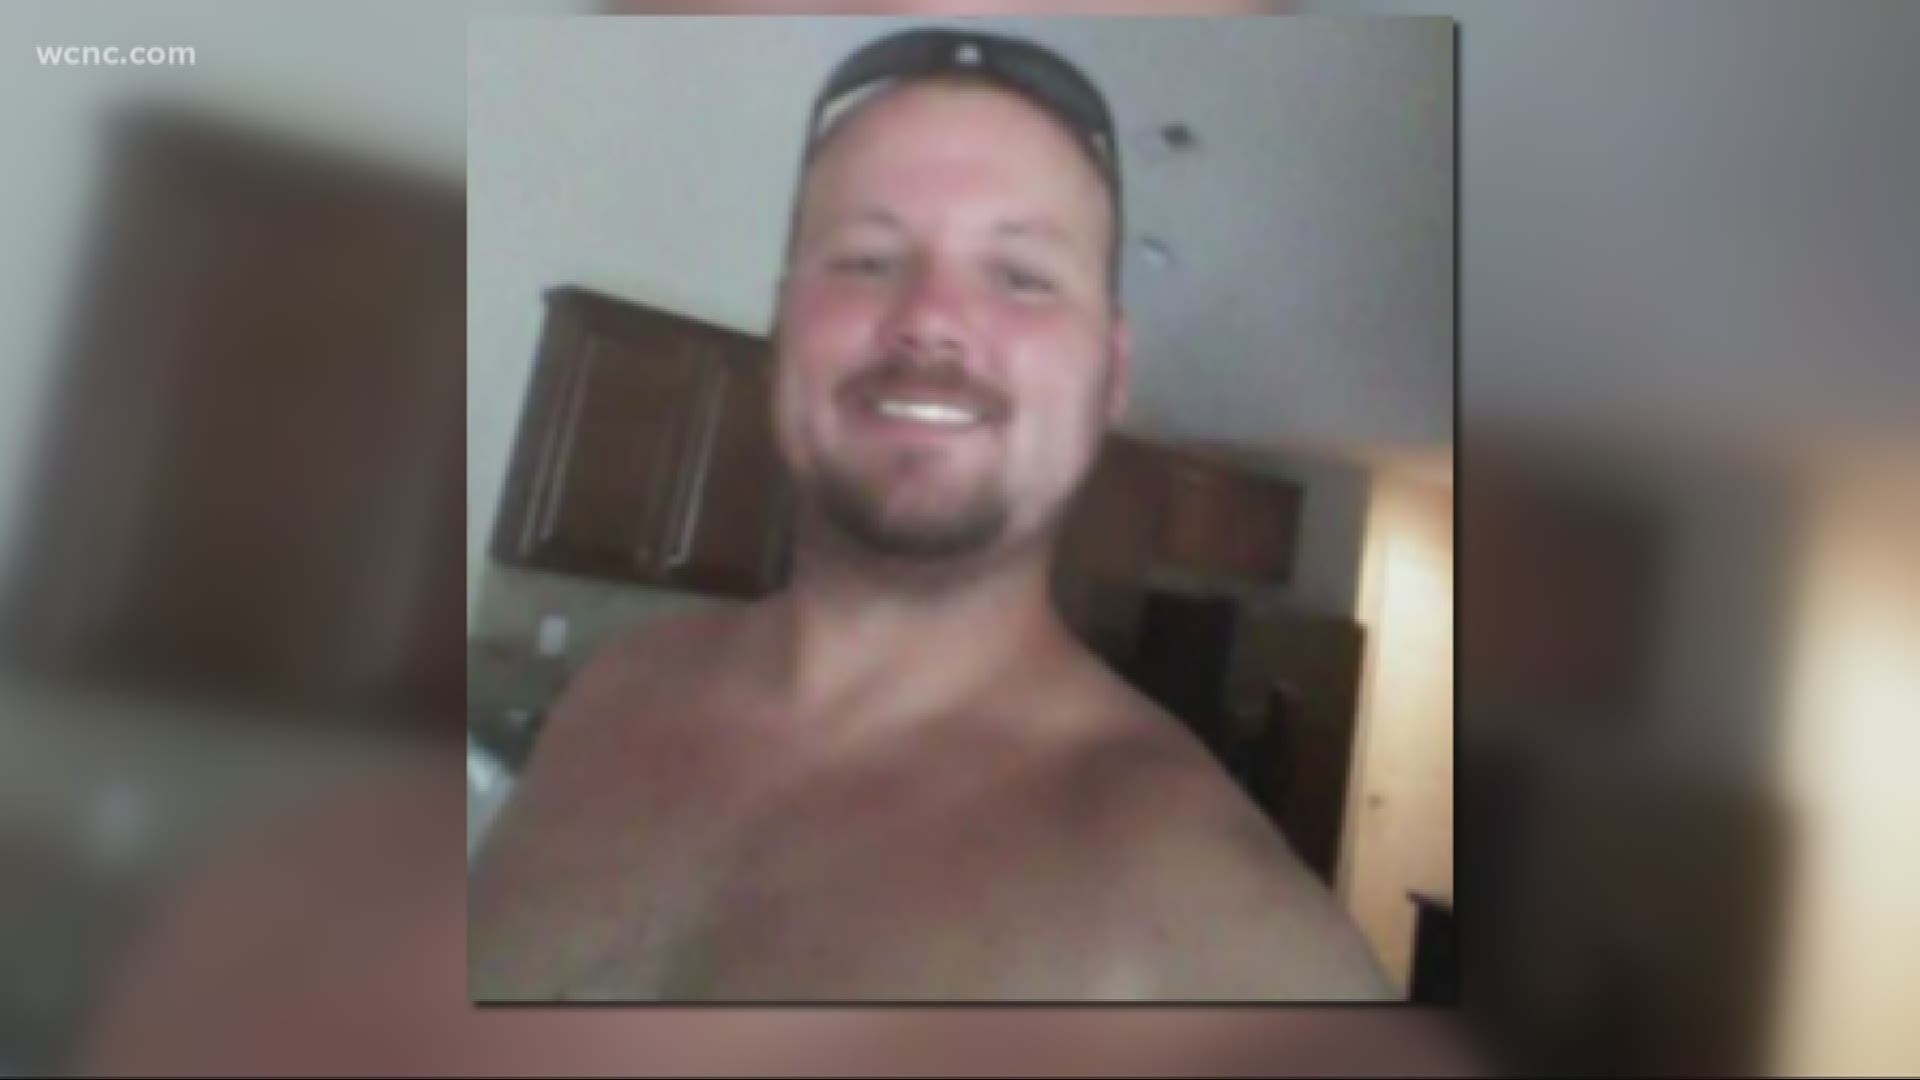 The decomposed body found Monday in a field in Union County has been identified as that of a man who has been missing since September 3.